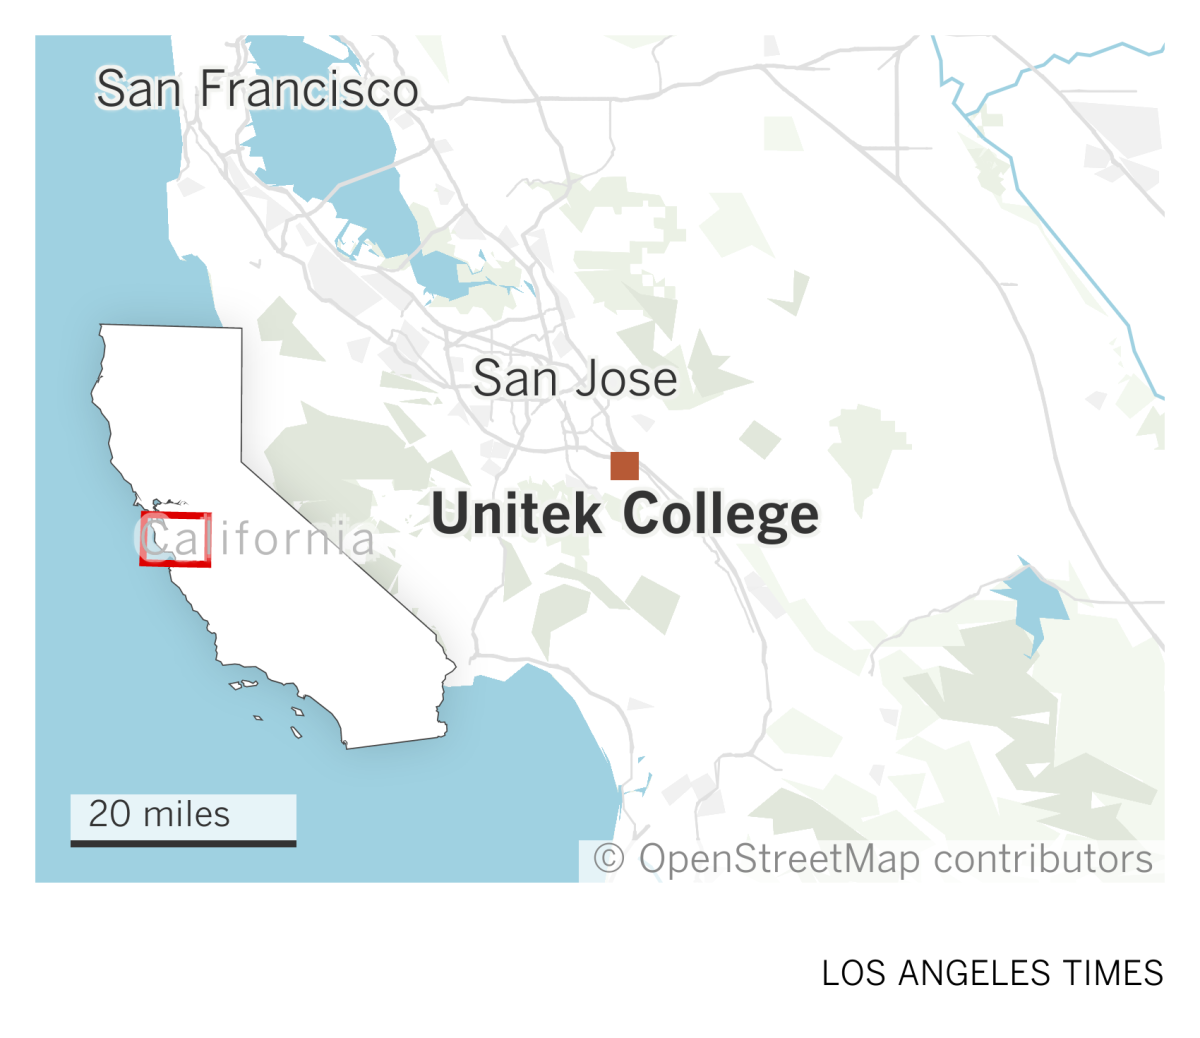 A map of the San Francisco Bay Area shows the location of Unitek College in south San Jose